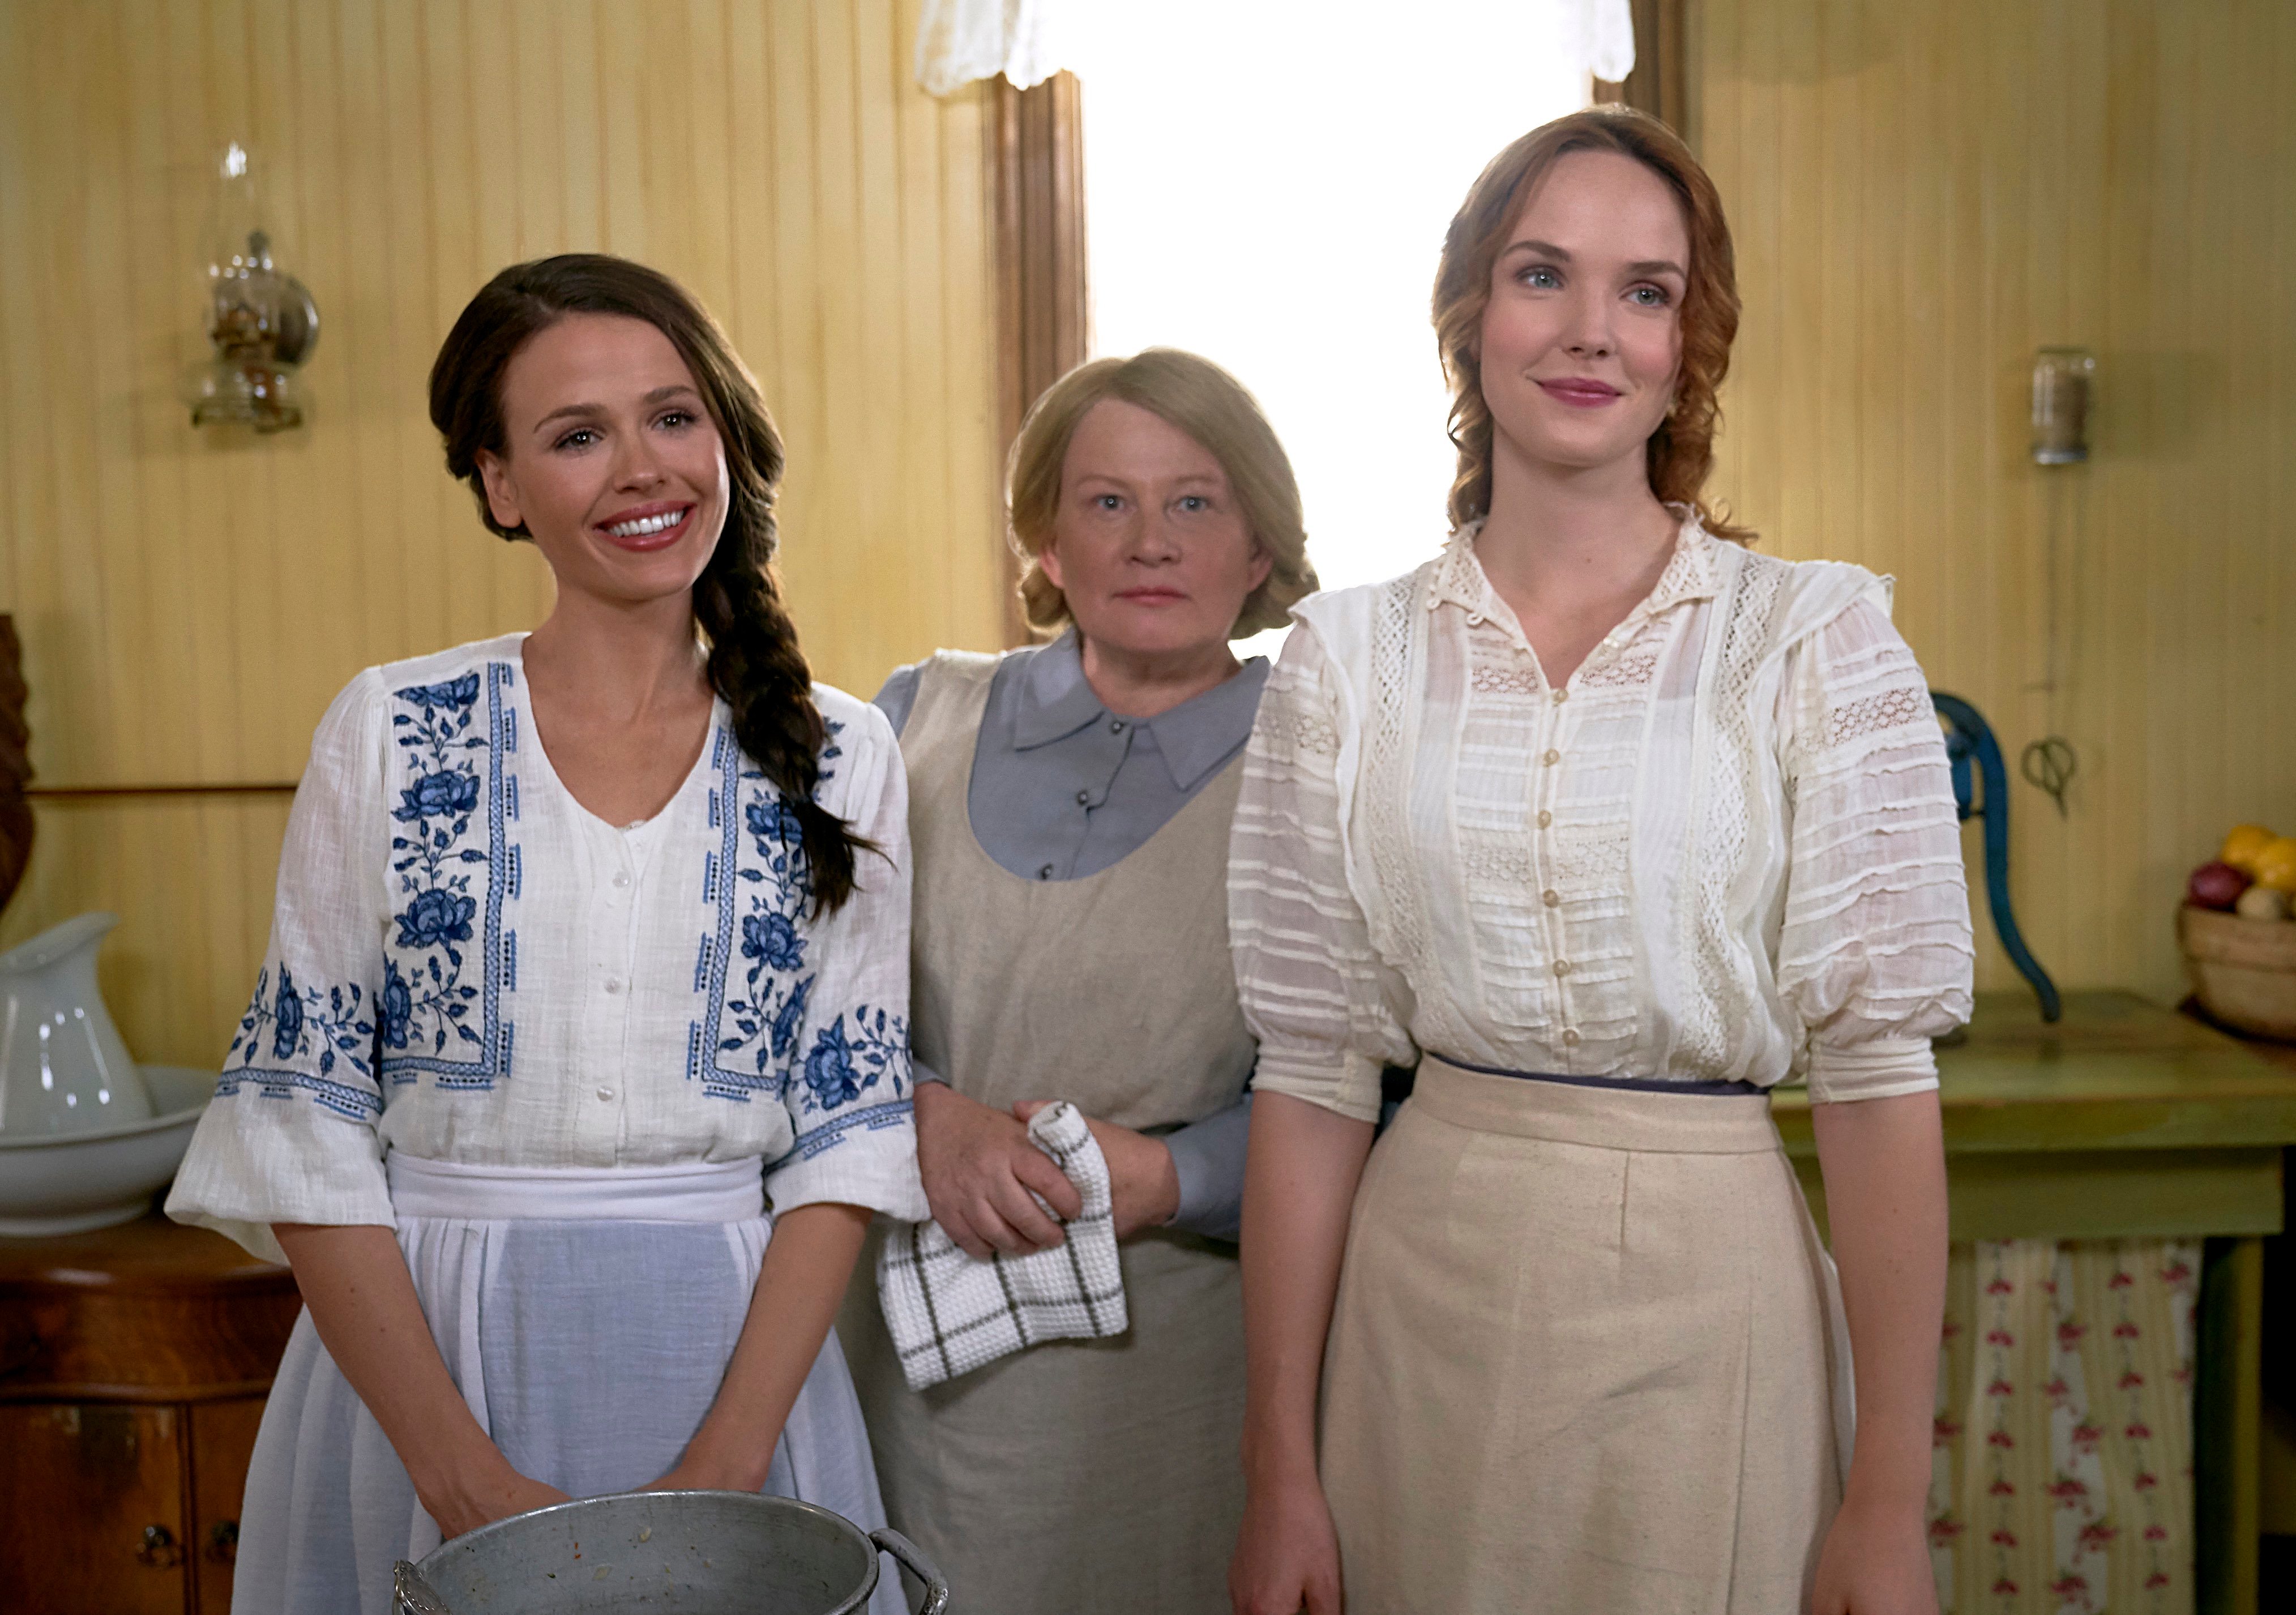 Grace and Lillian smiling with older woman in apron behind them in When Hope Calls 